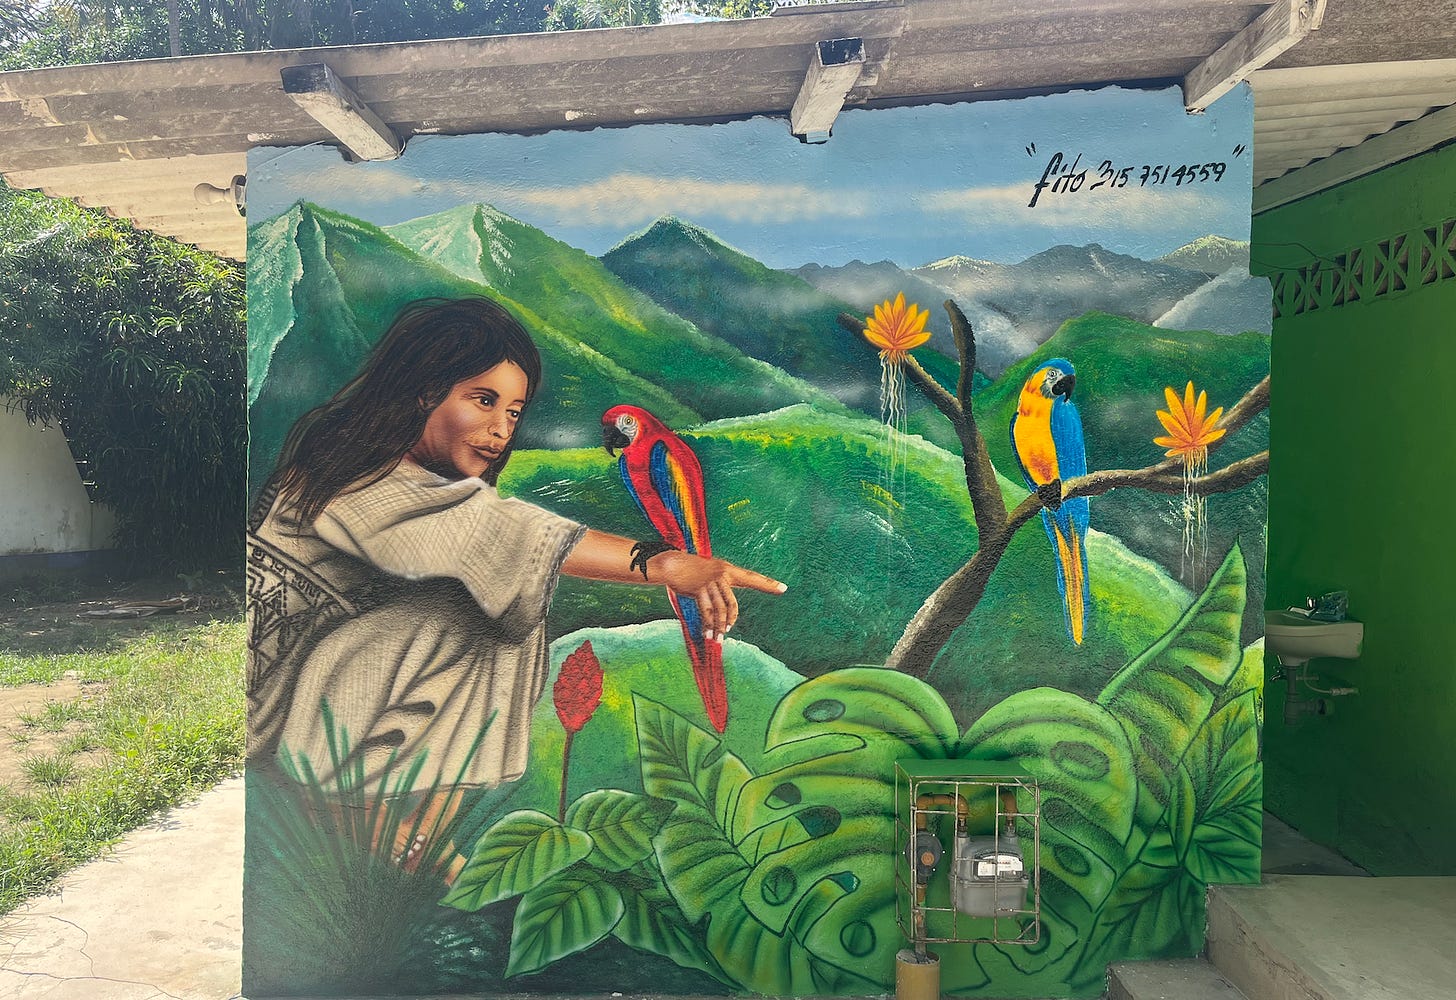 Mural of Indigenous Arhuaco person holding a macaw.